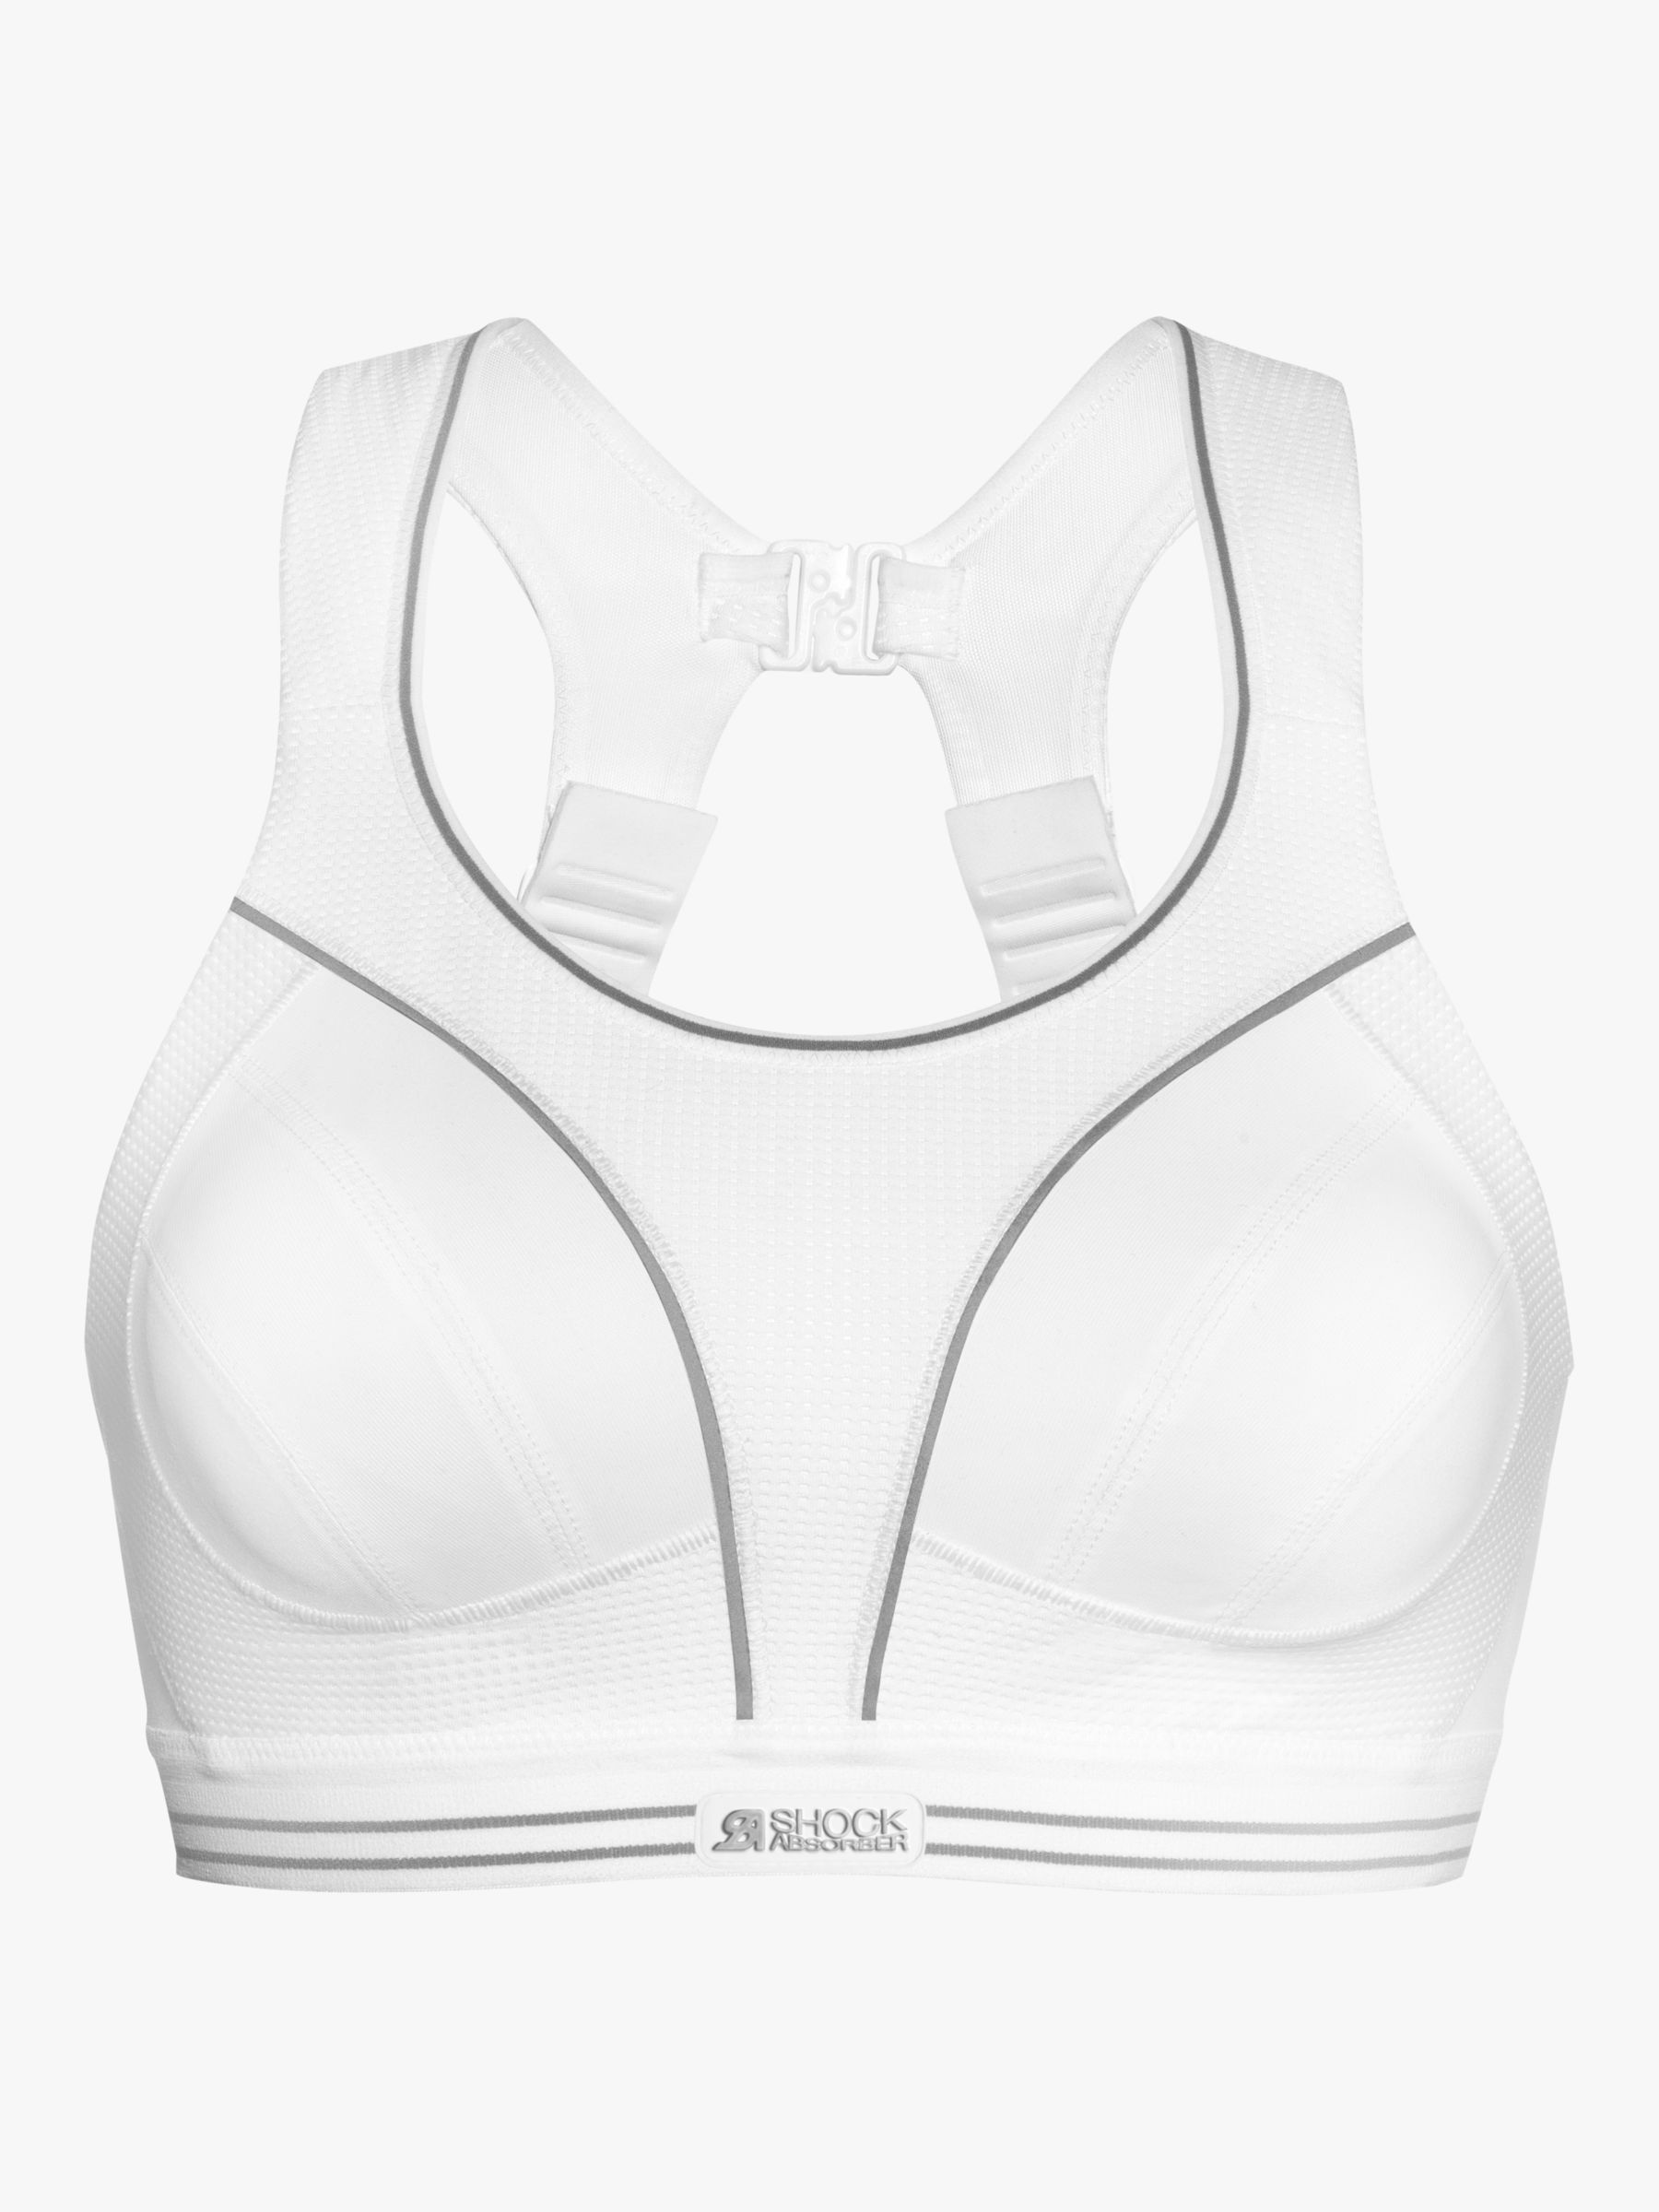 Free online course on sports bras and breast health - Jog Scotland